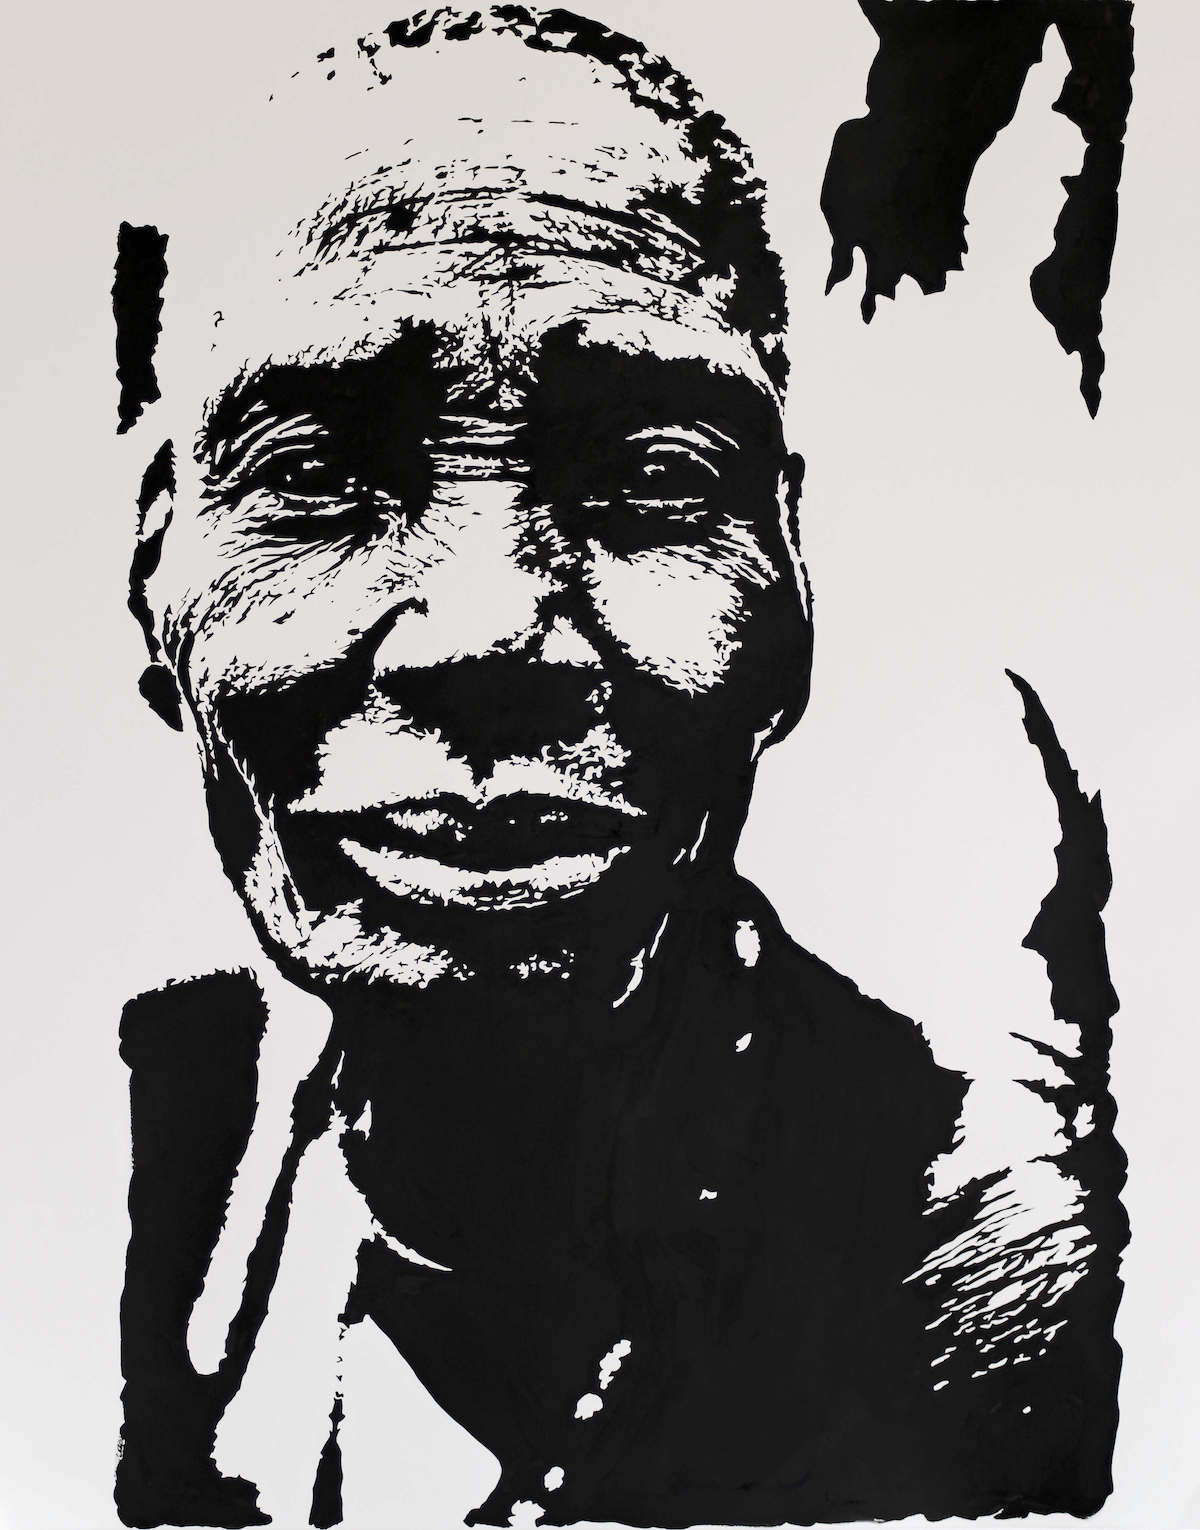 Black and white painting of an old black woman